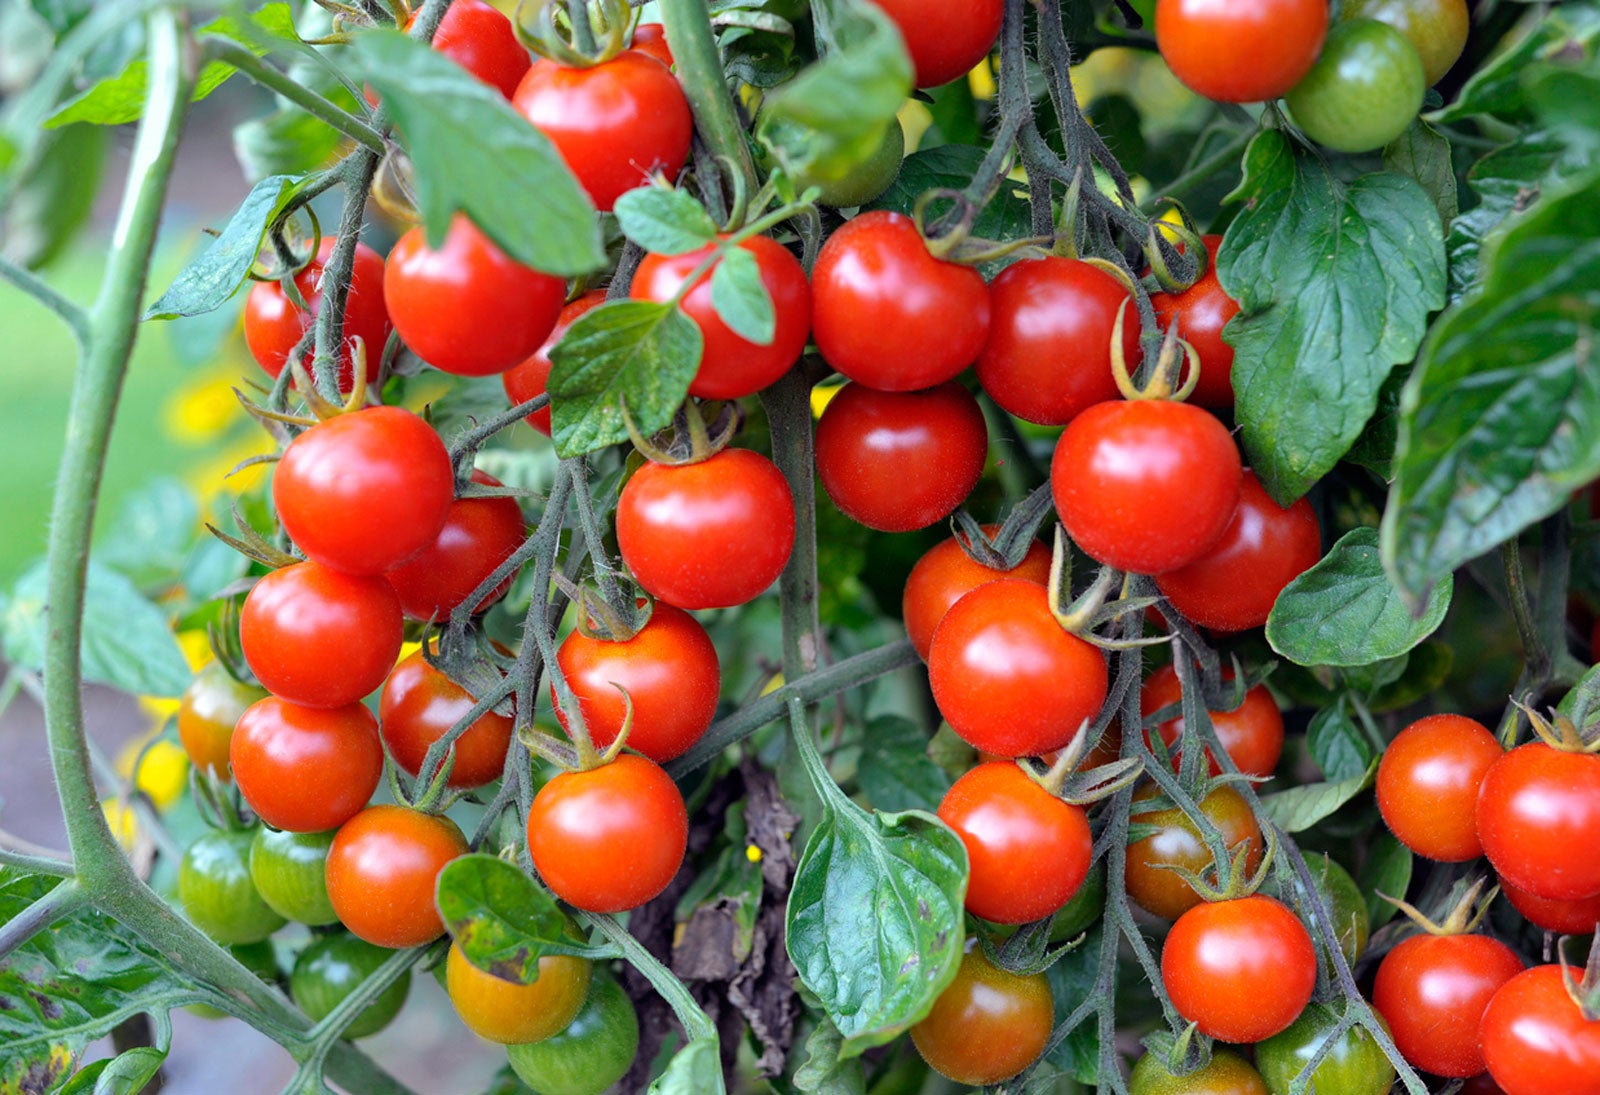 Planting Cherry Tomatoes: How To Grow Cherry Tomatoes